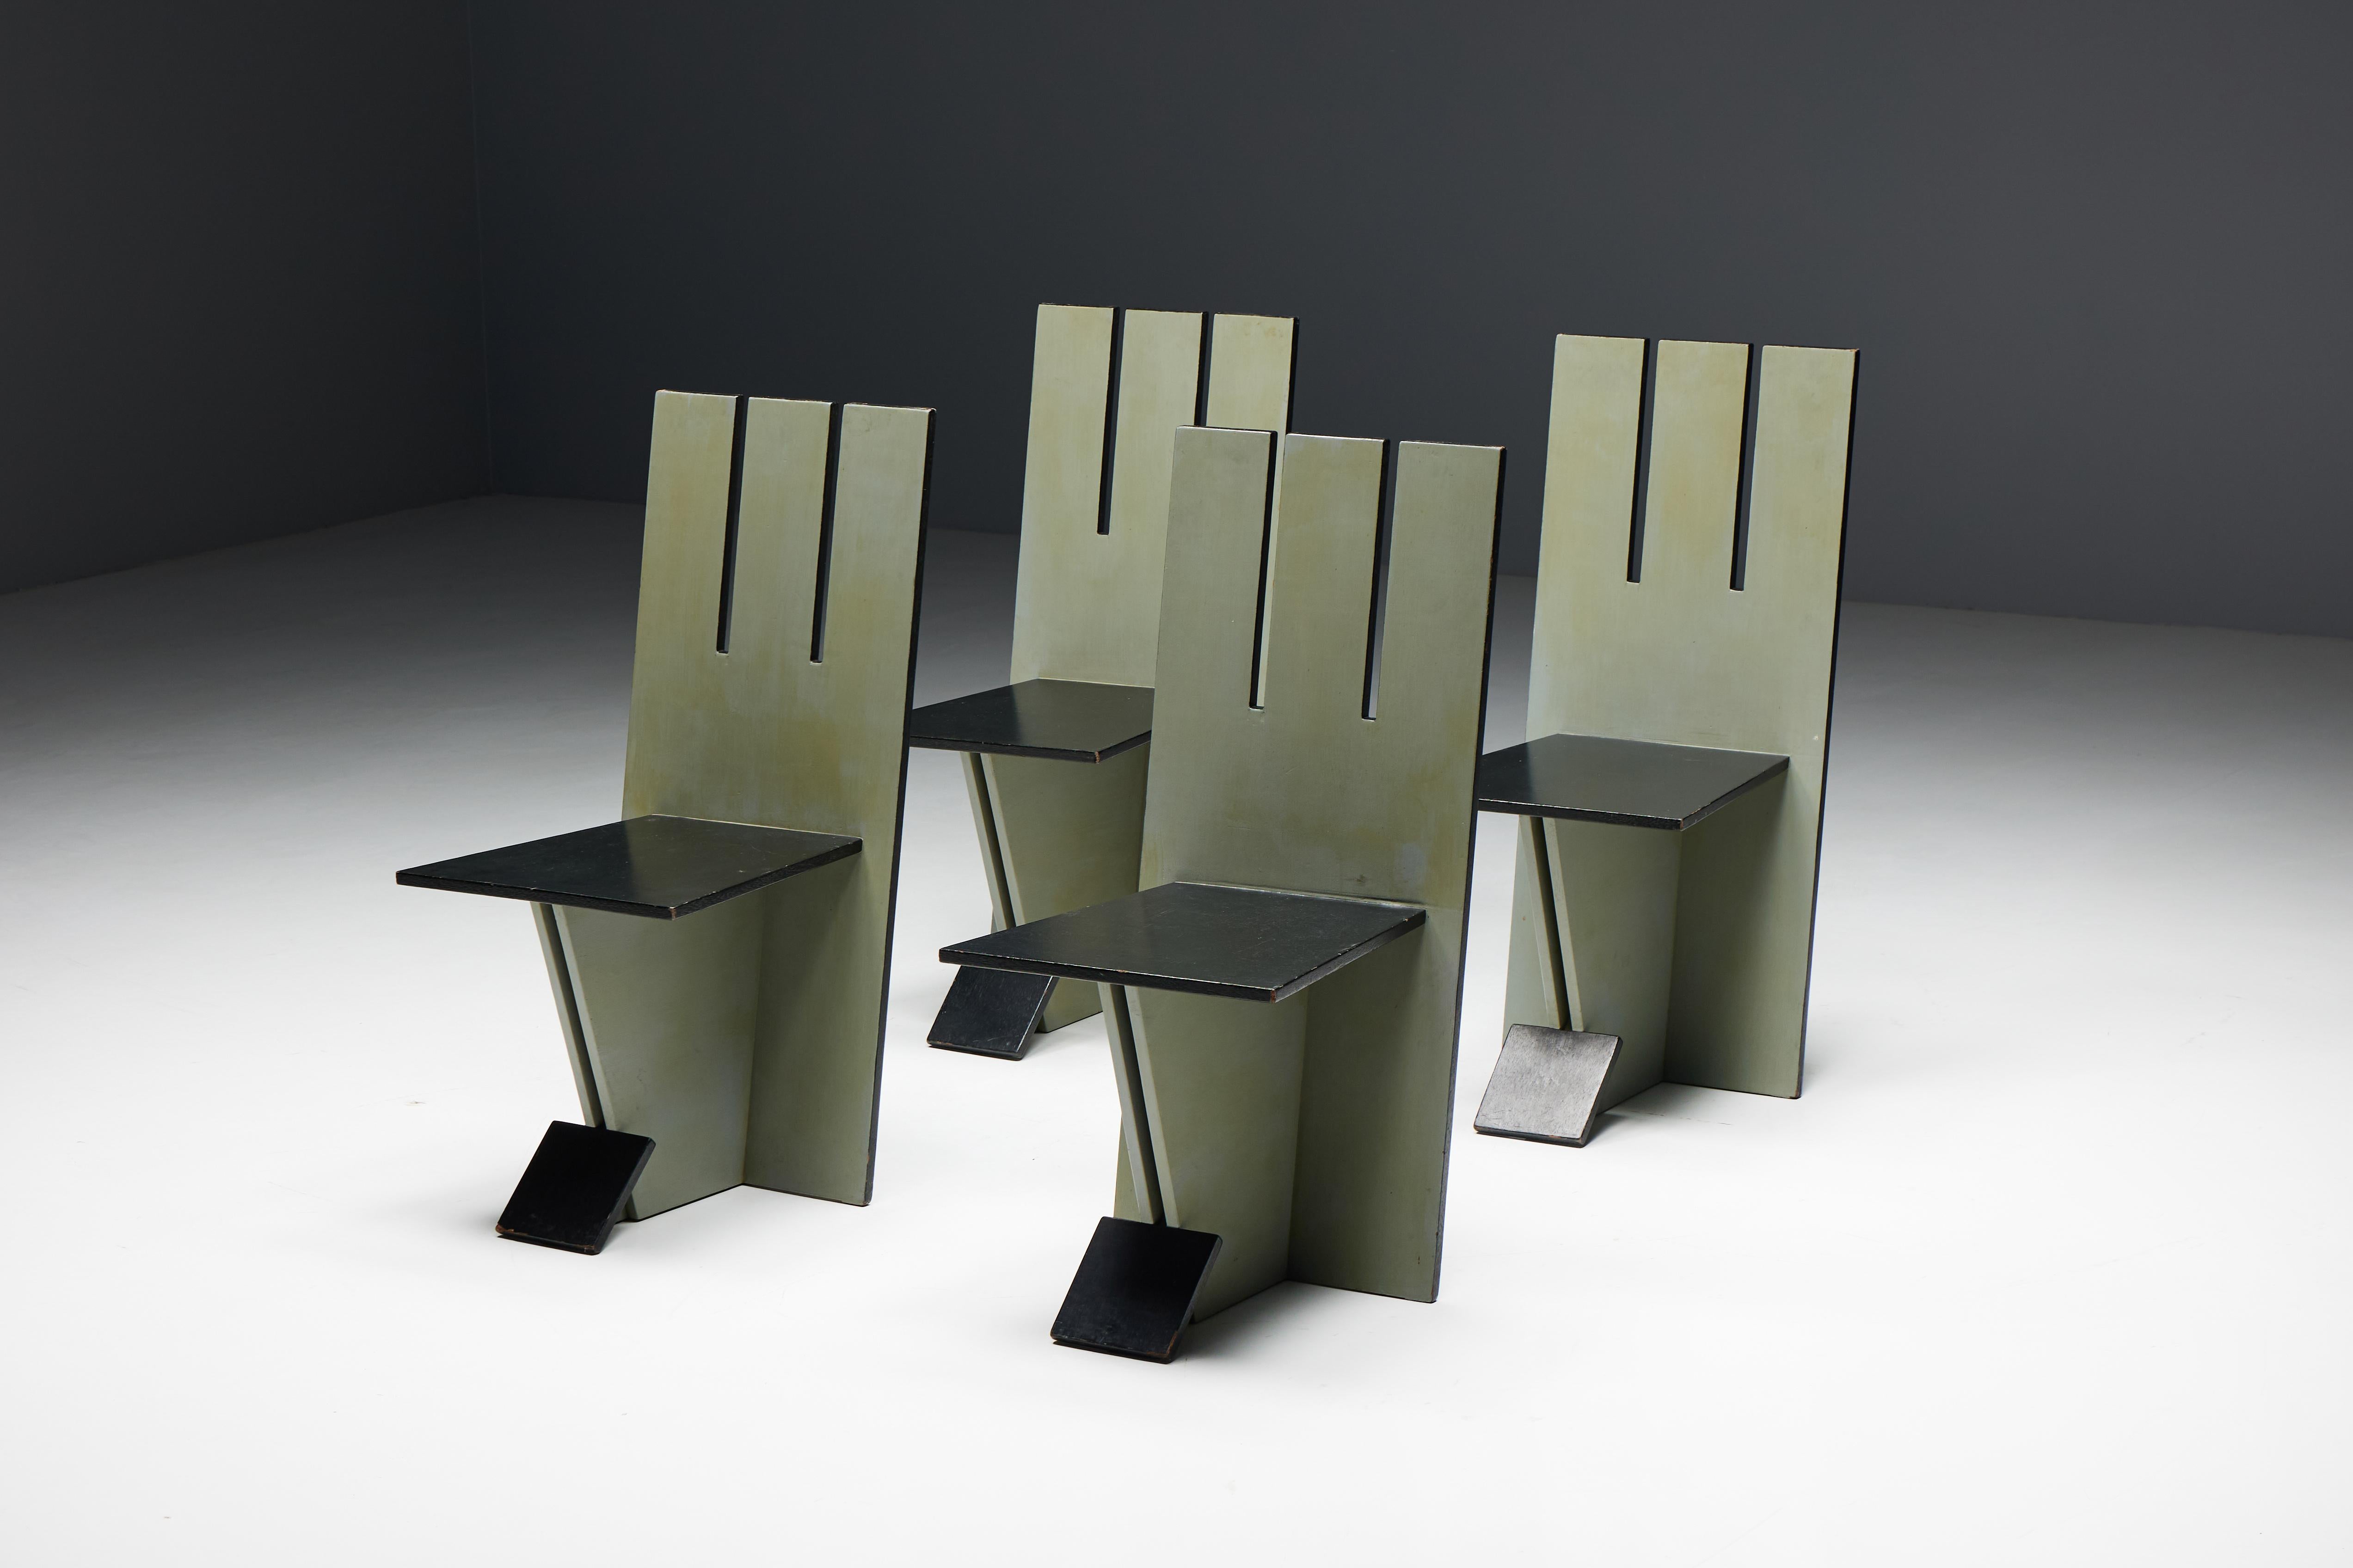 European Dining Chairs in the style of De Stijl Movement, Netherlands, 1950s For Sale